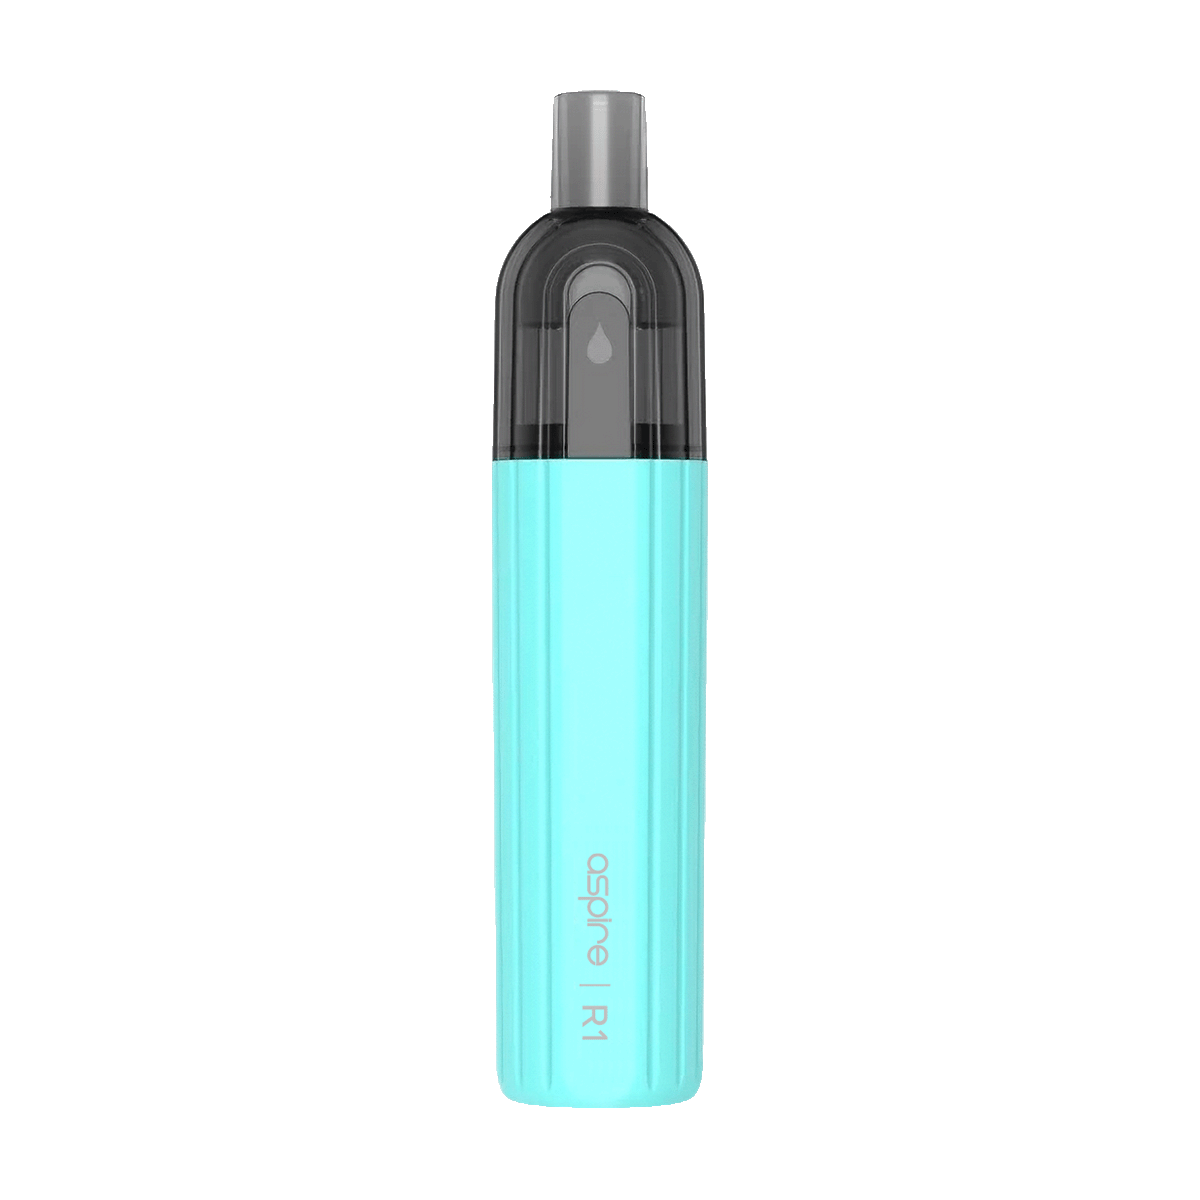 One Up R1 Disposable Device by Aspire - Aqua Blue